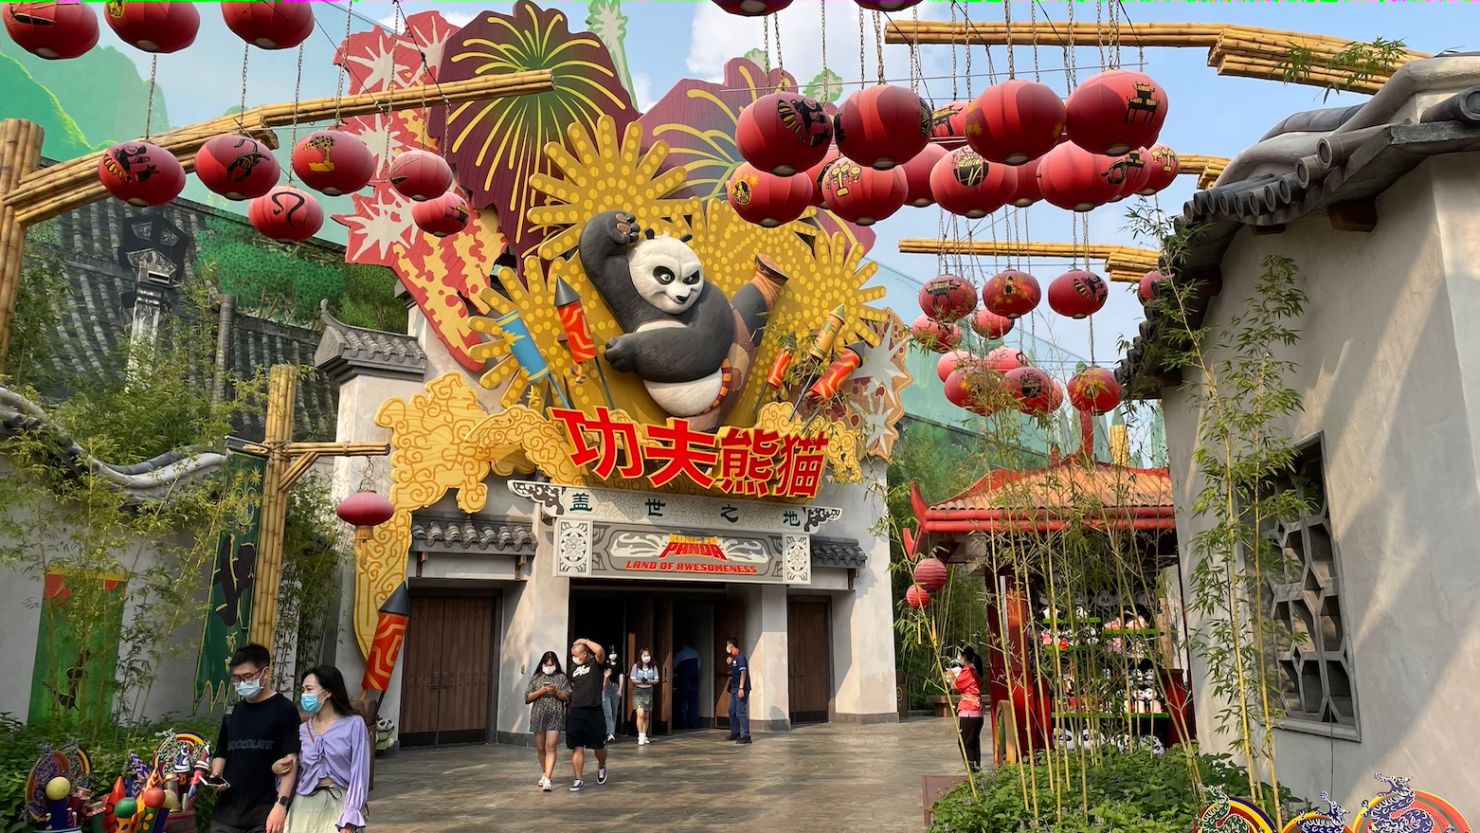 China's first Universal Studios theme park opens this month in Beijing.